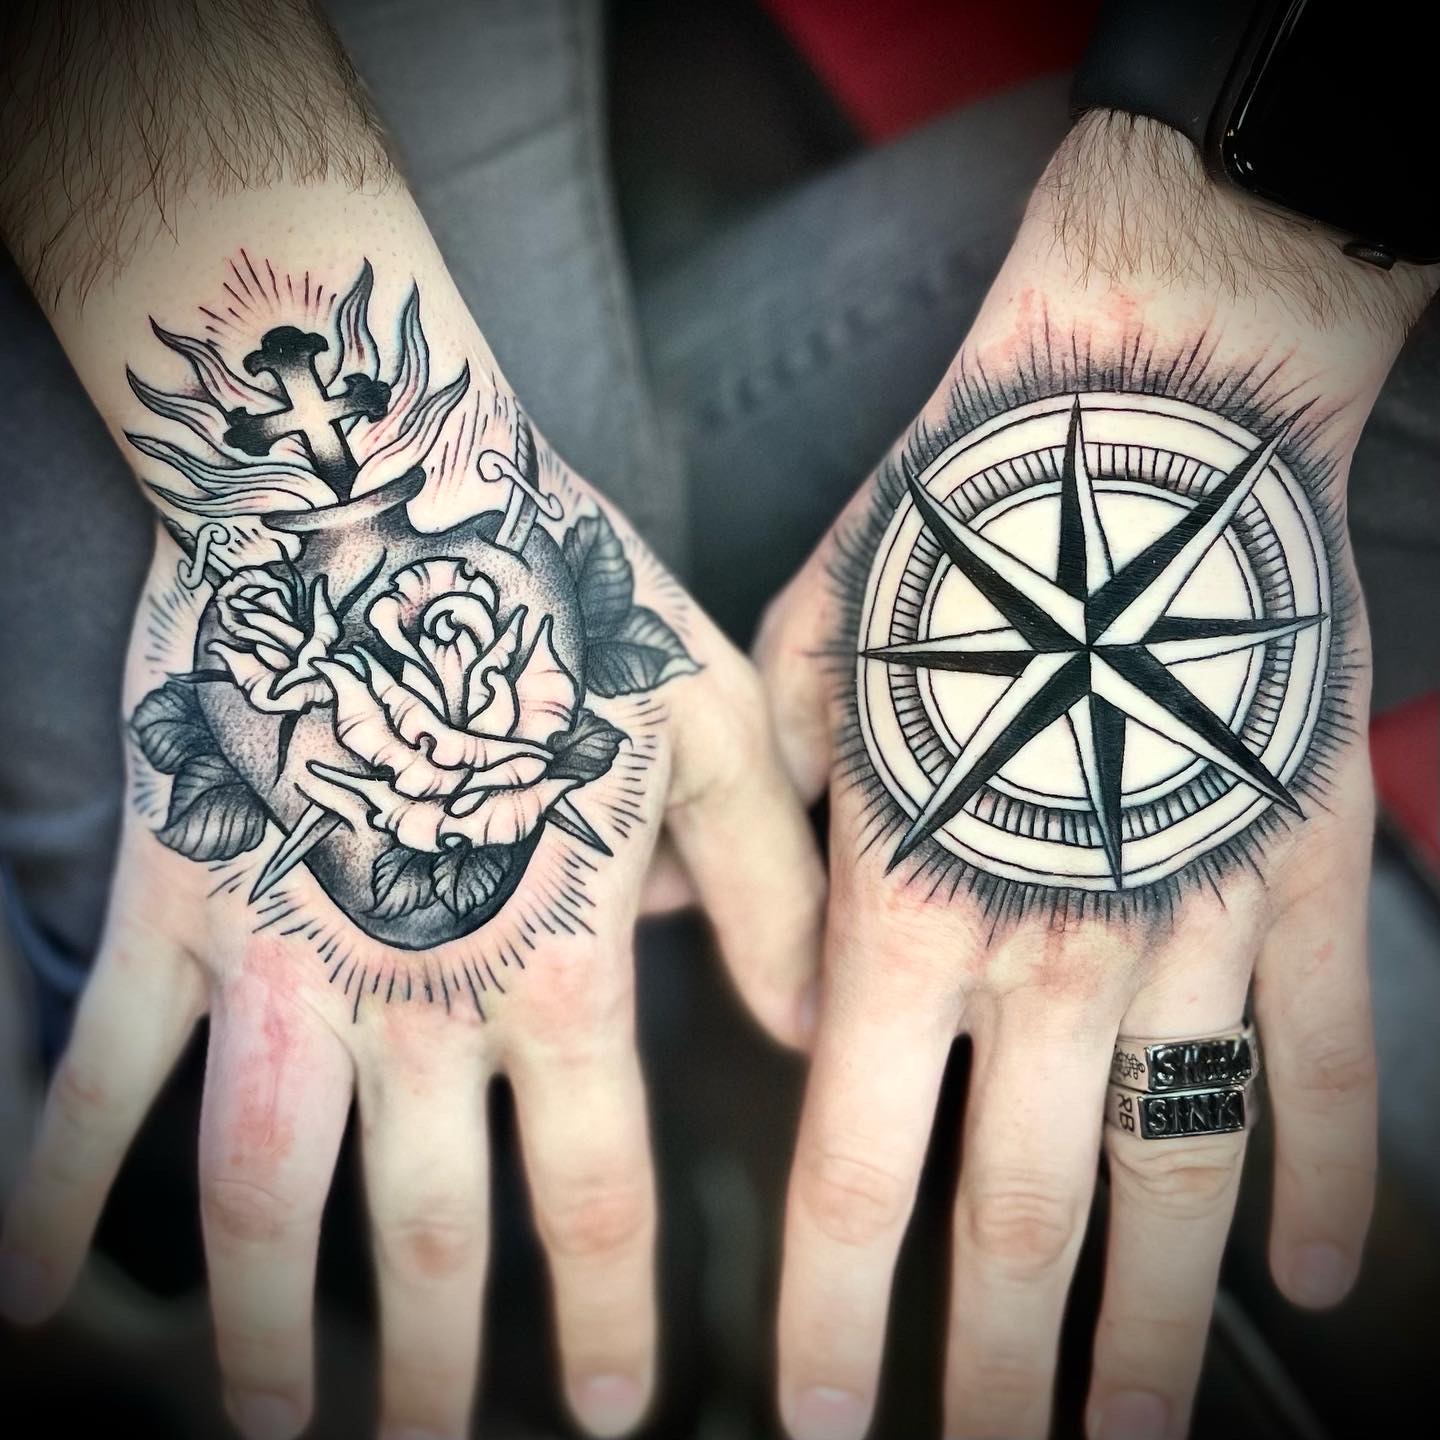 Man with two black ink tattoos on his hands